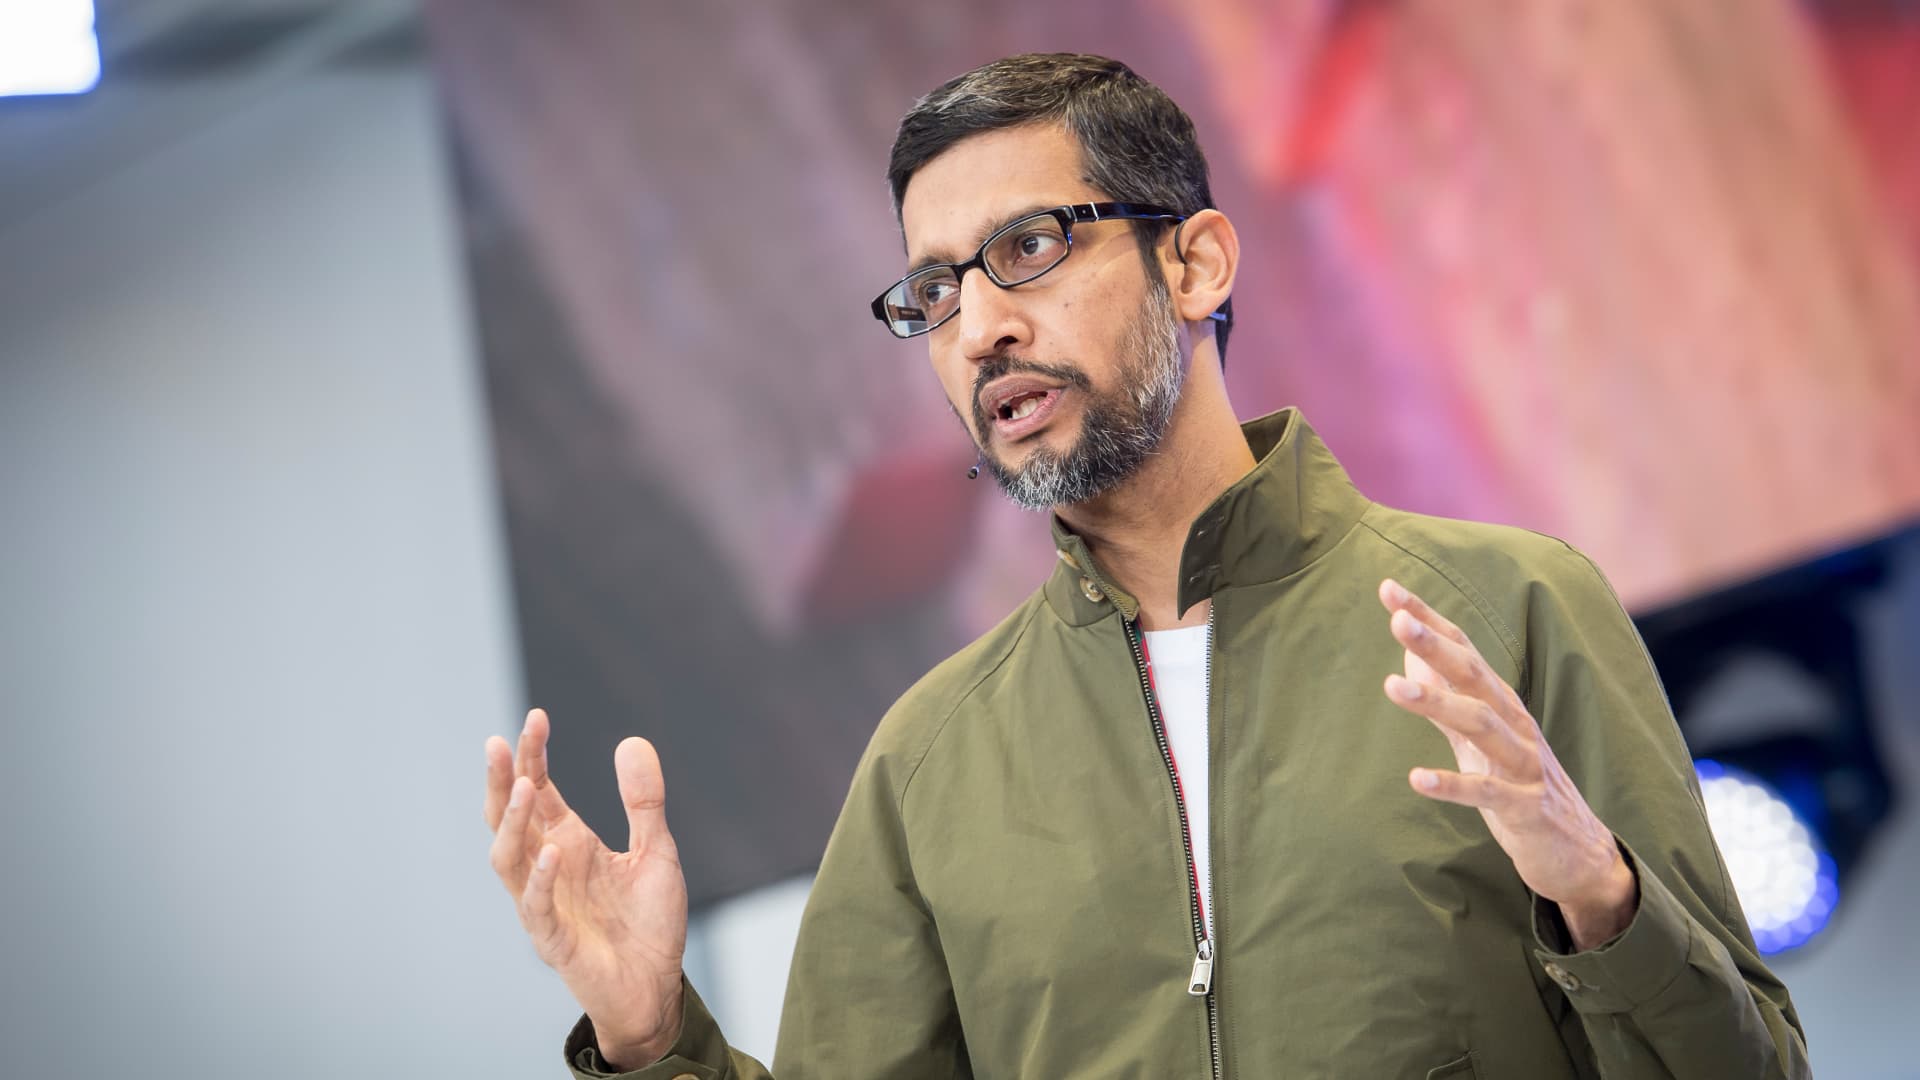 Sundar Pichai, chief executive officer of Google Inc., speaks during the Google I/O Developers Conference in Mountain View, California, U.S., on Tuesday, May 8, 2018.